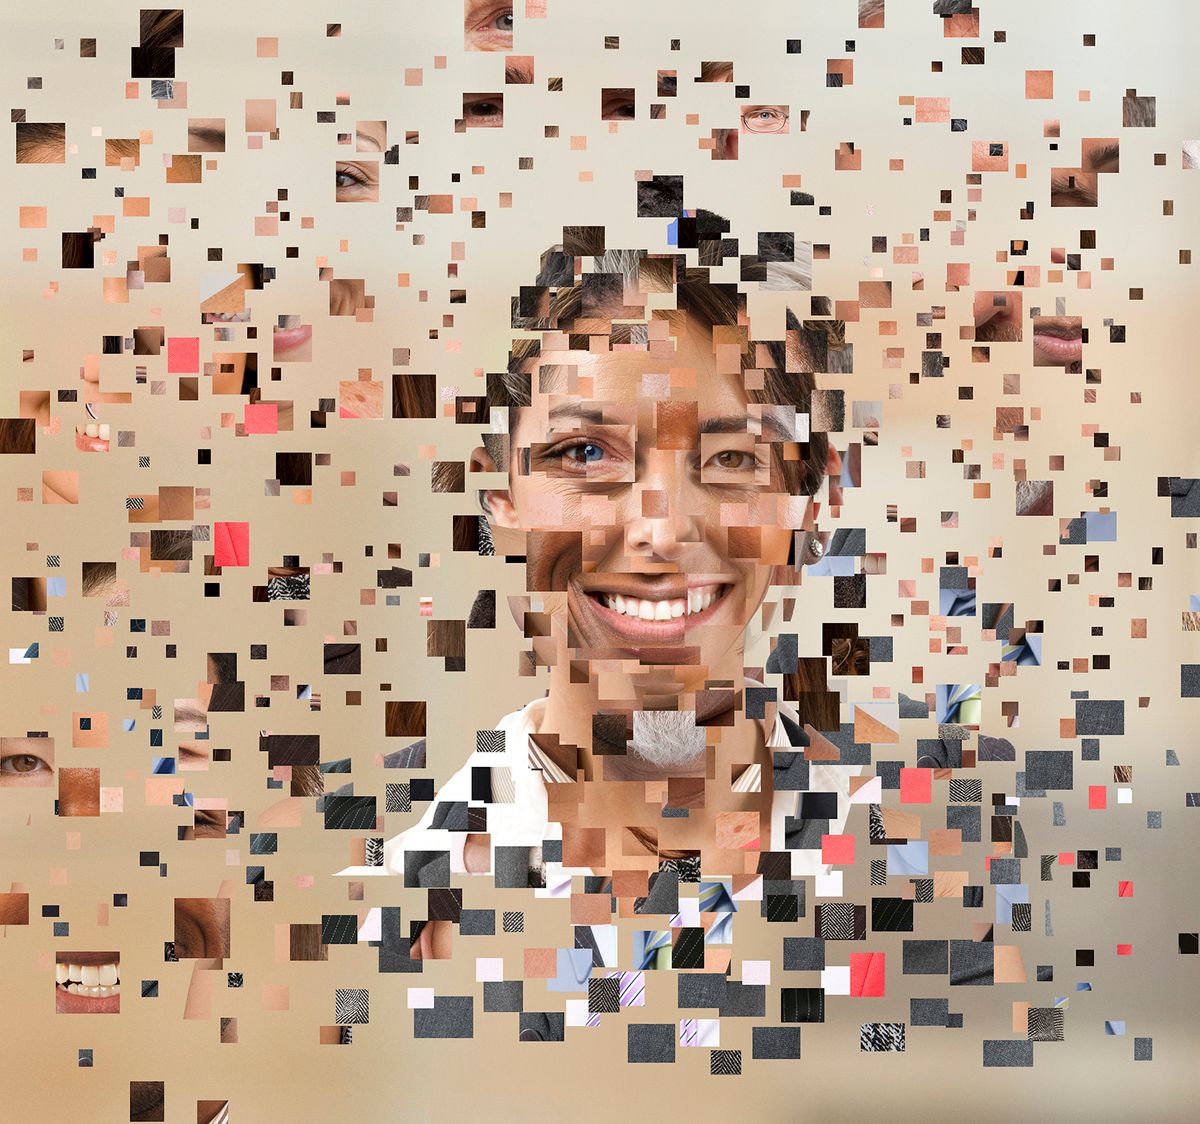 Collage of pixels forming human face